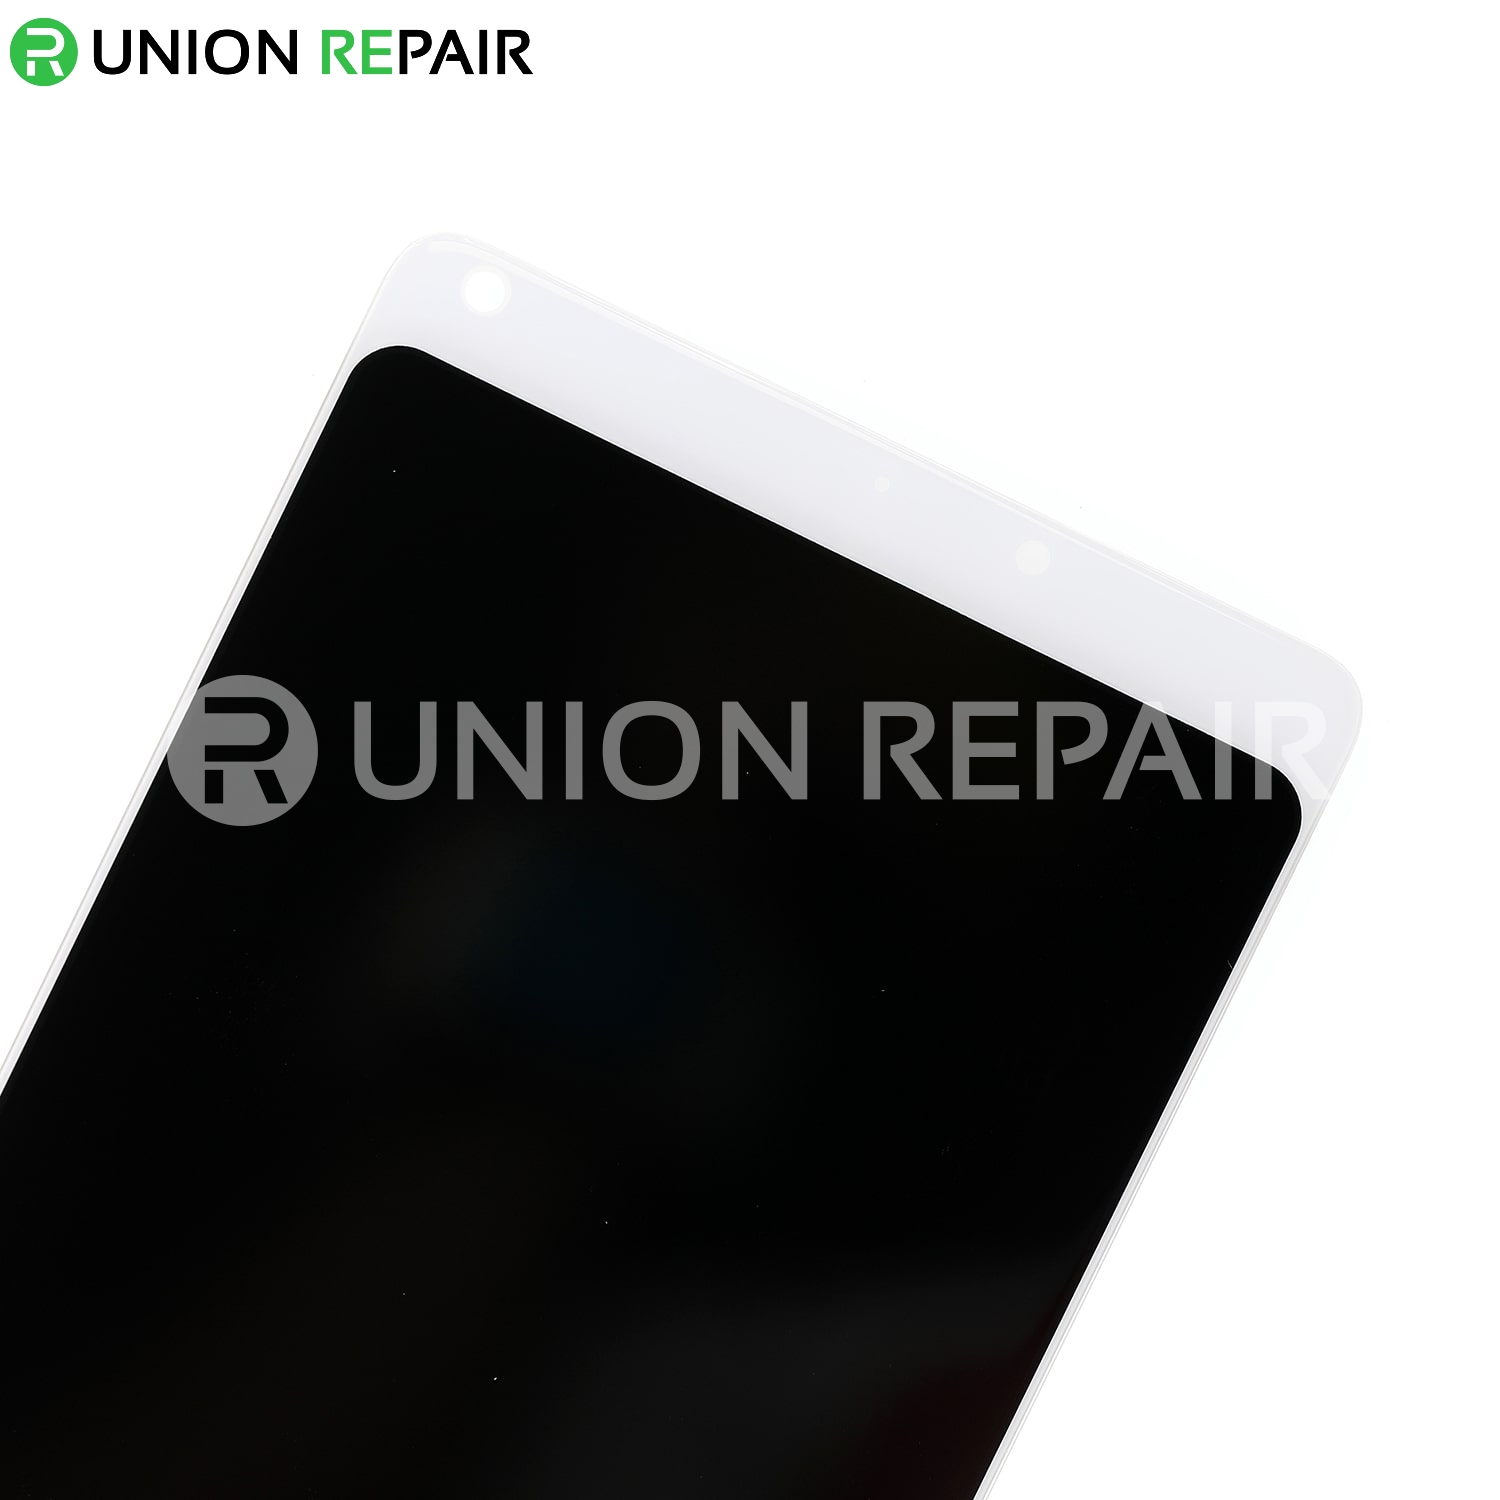 Replacement for XiaoMi MIX 2 LCD Screen Digitizer - White